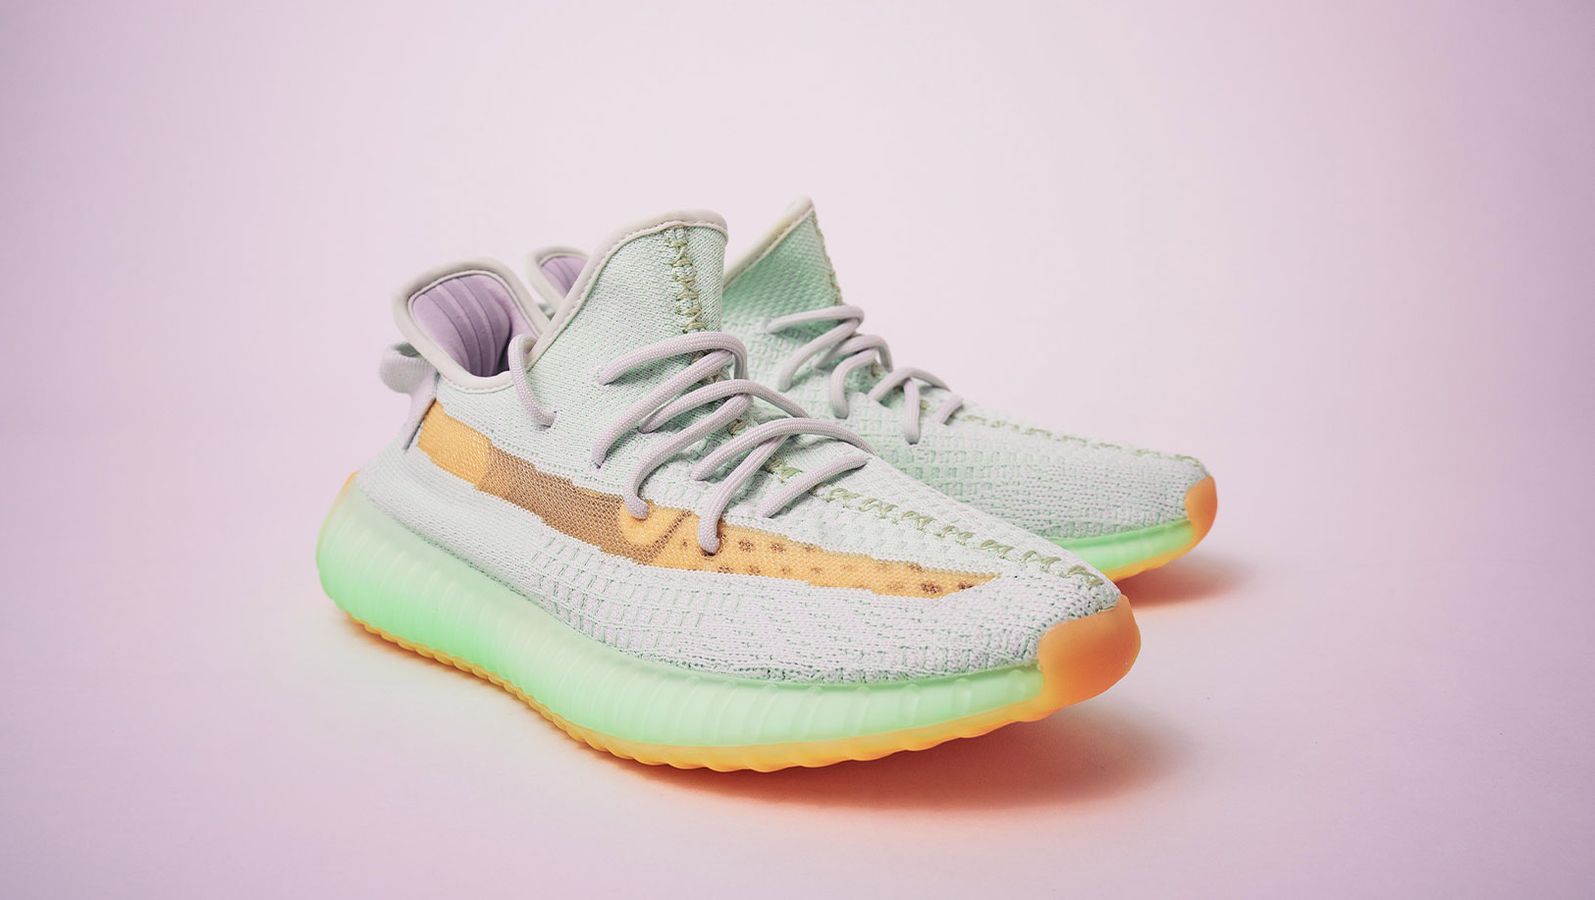 adidas Yeezy product image of a mint green and orange pair of sneakers with a pink backdrop.